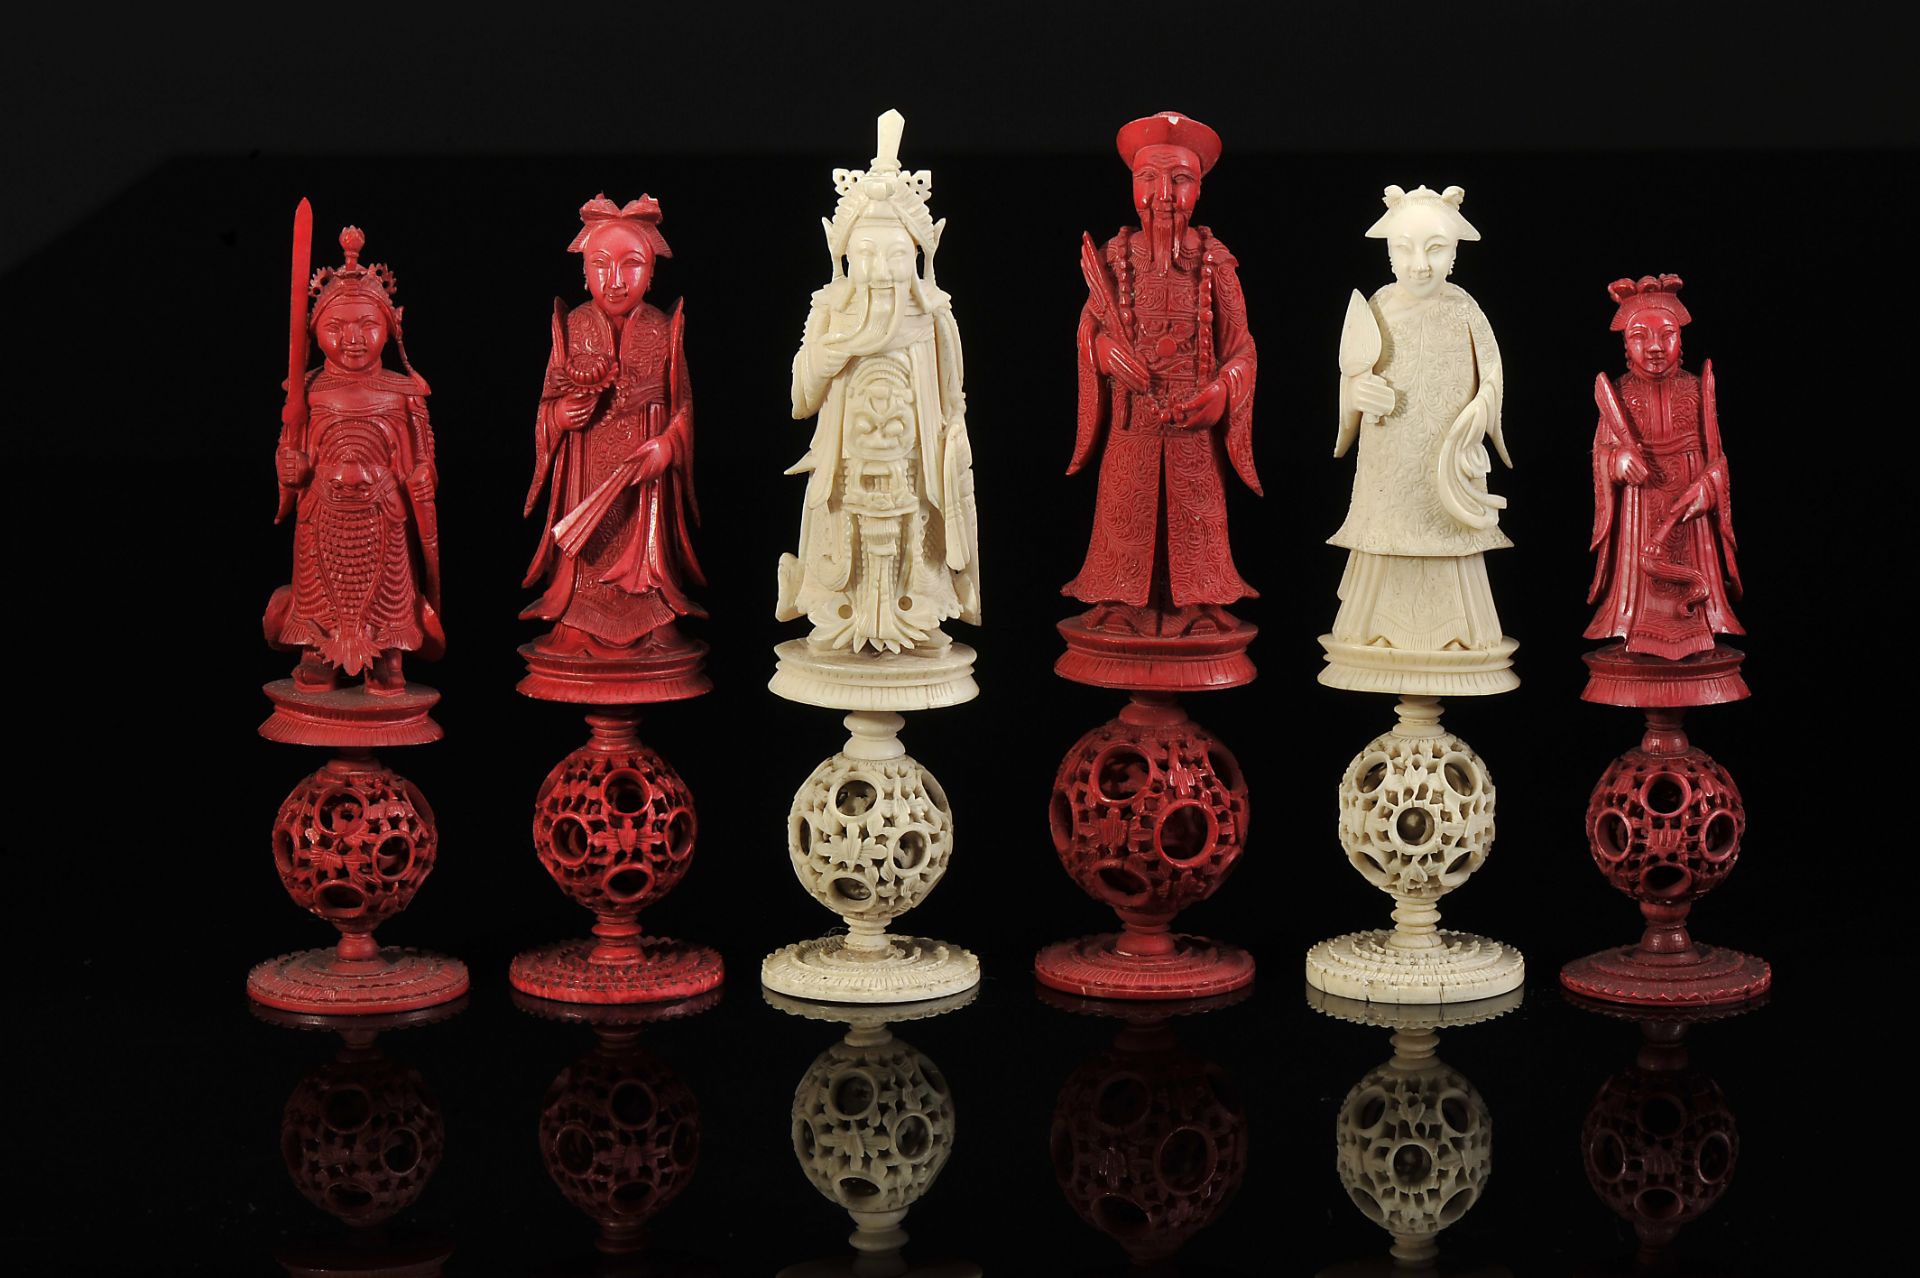 Six Chess Pieces, "Three Kings" and "Three Queens" on "Ball of happiness"